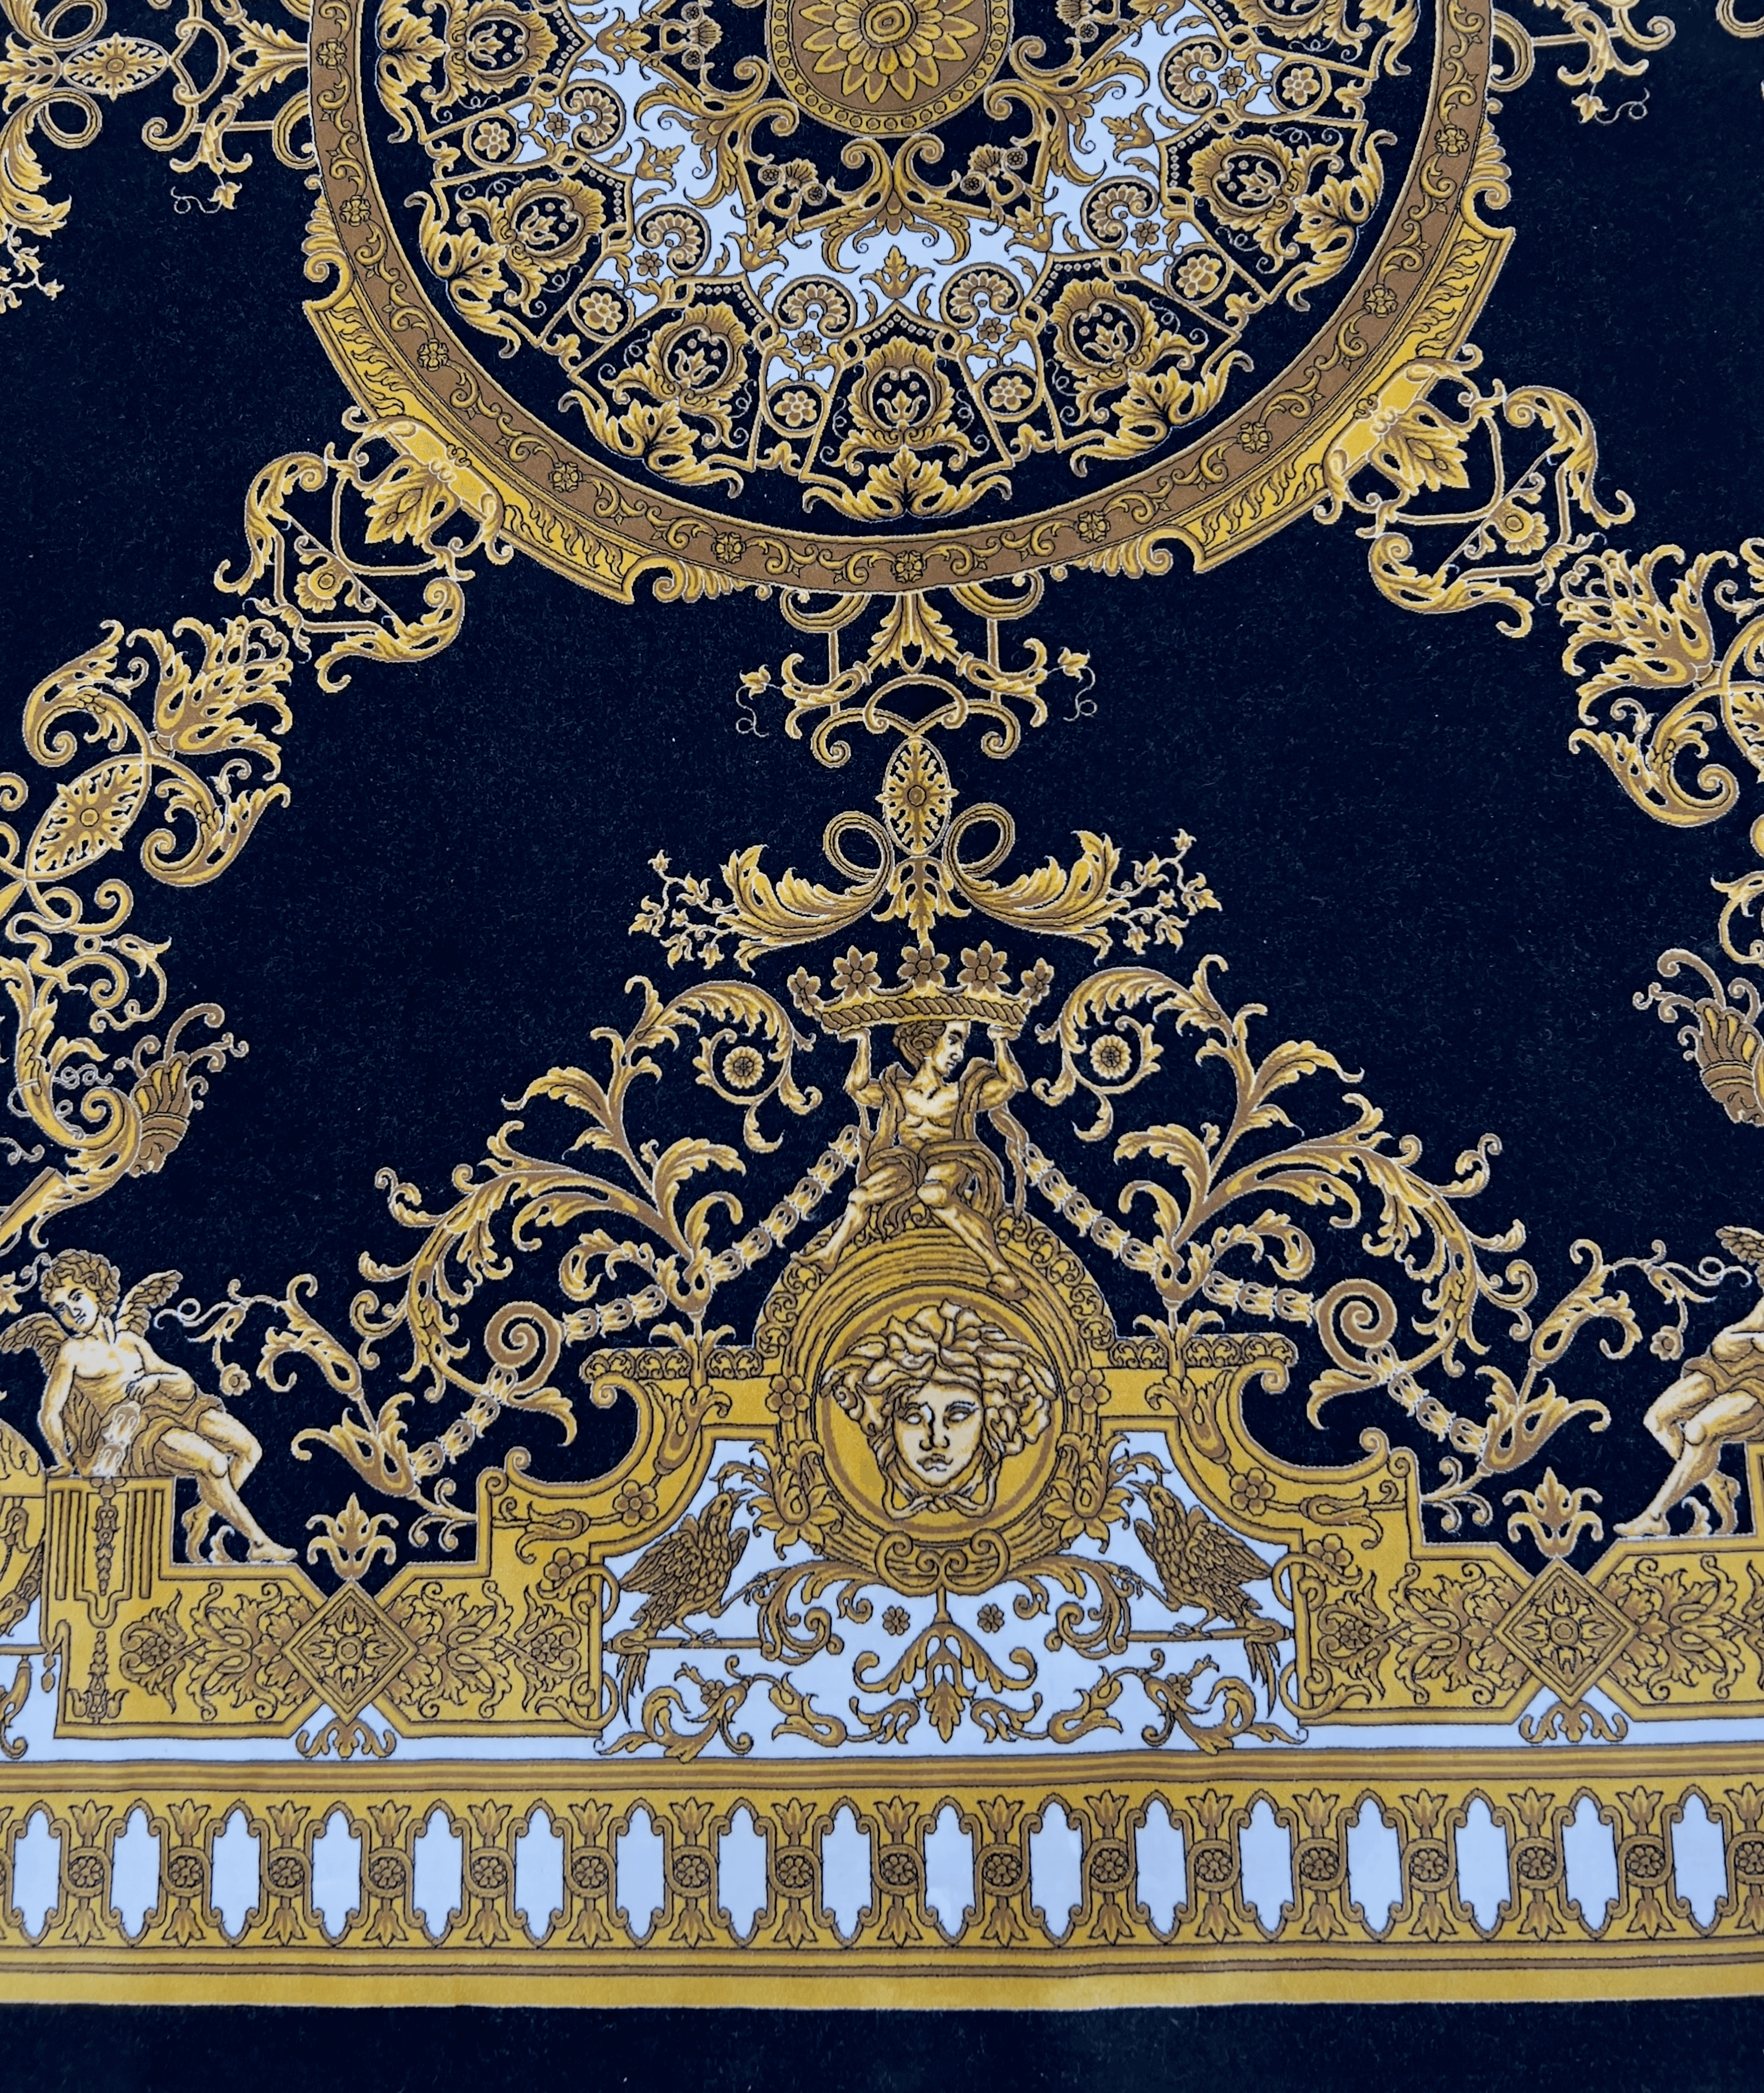 Square Black and Gold Rug